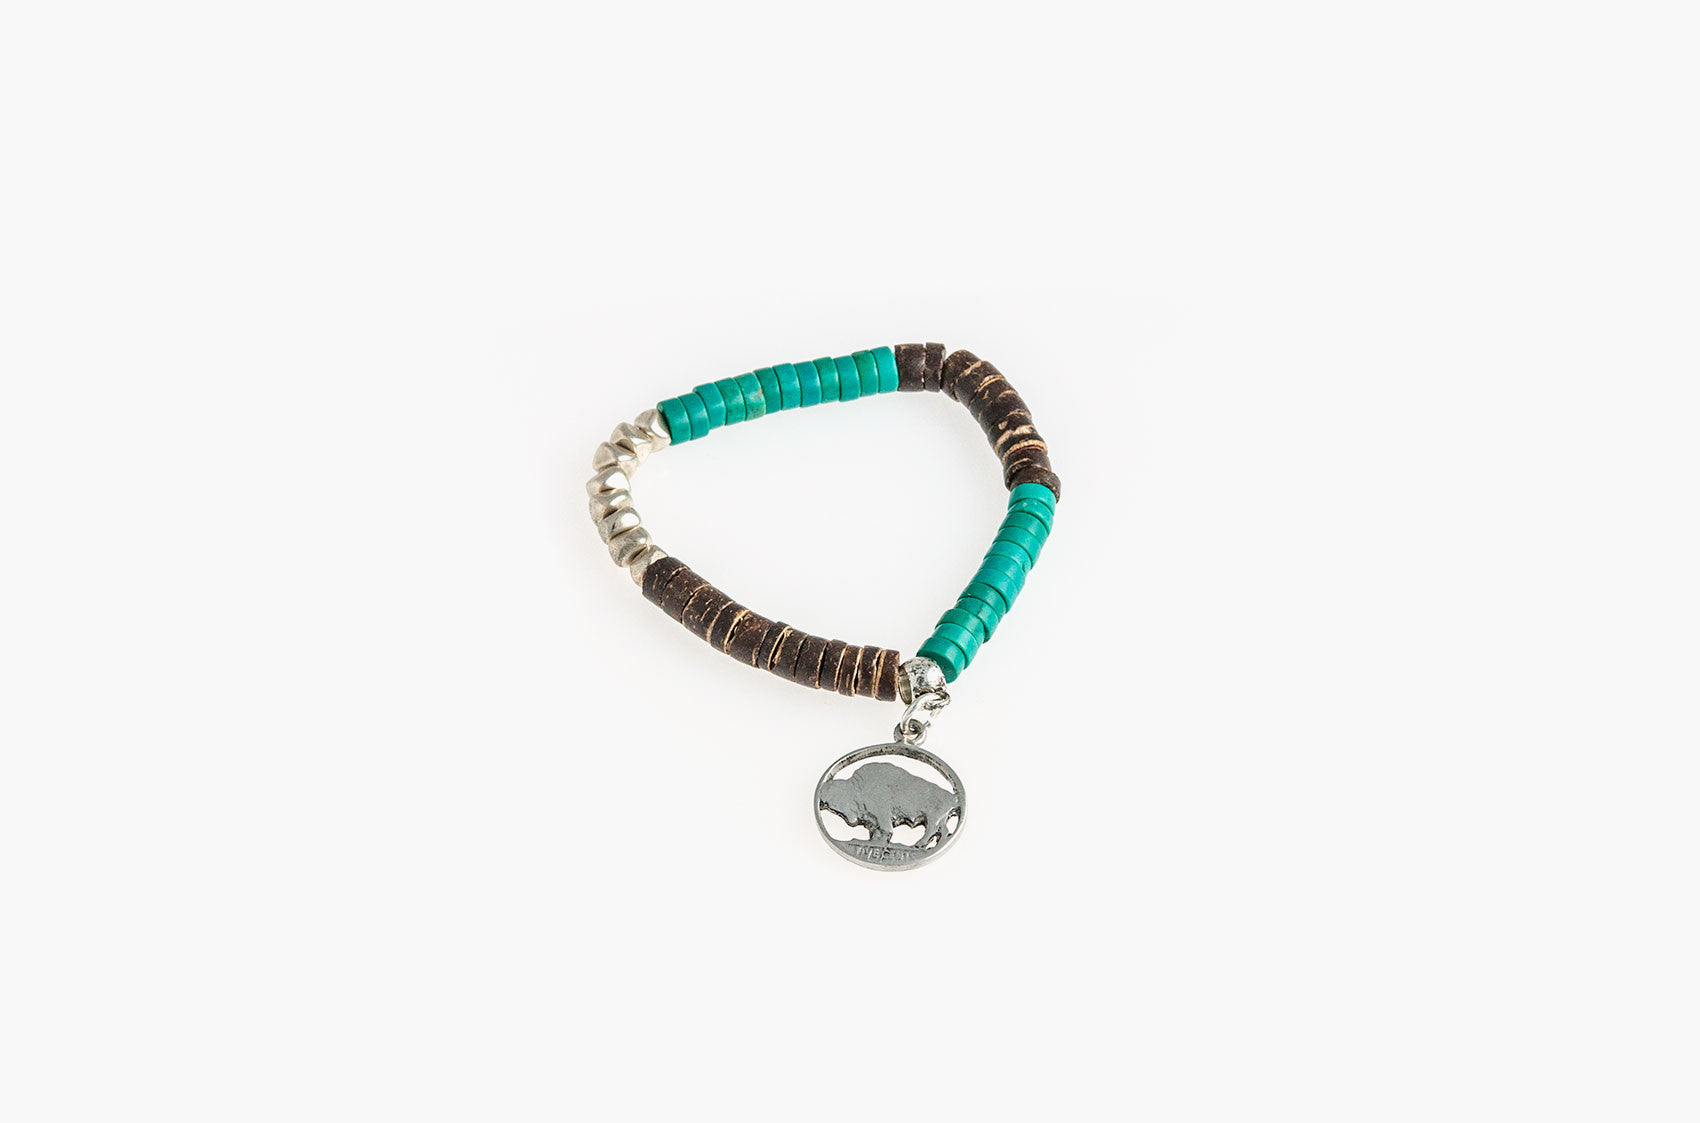 Wood, metal and turquoise coin-charm bracelet